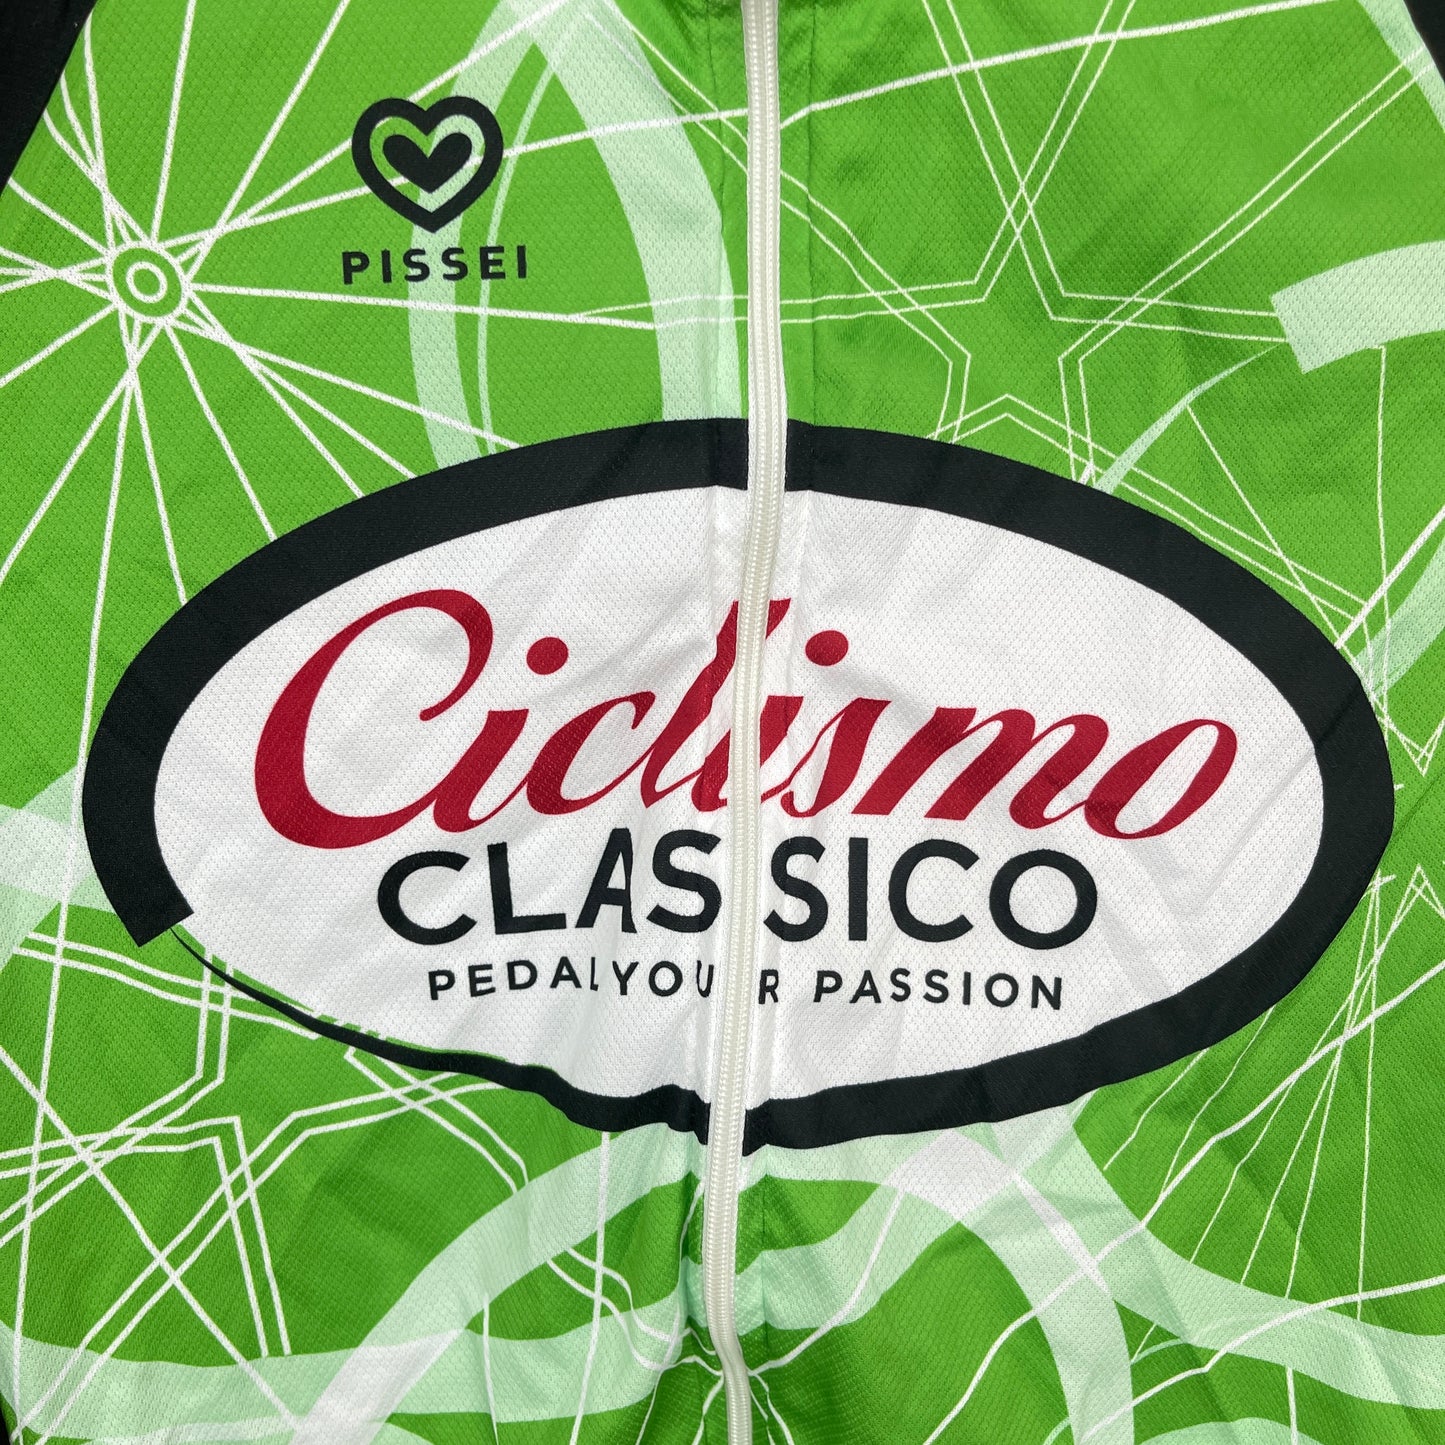 Pissei Ciclismo Classico Size 4 Large Green Men's Cycling Jersey Short Sleeve